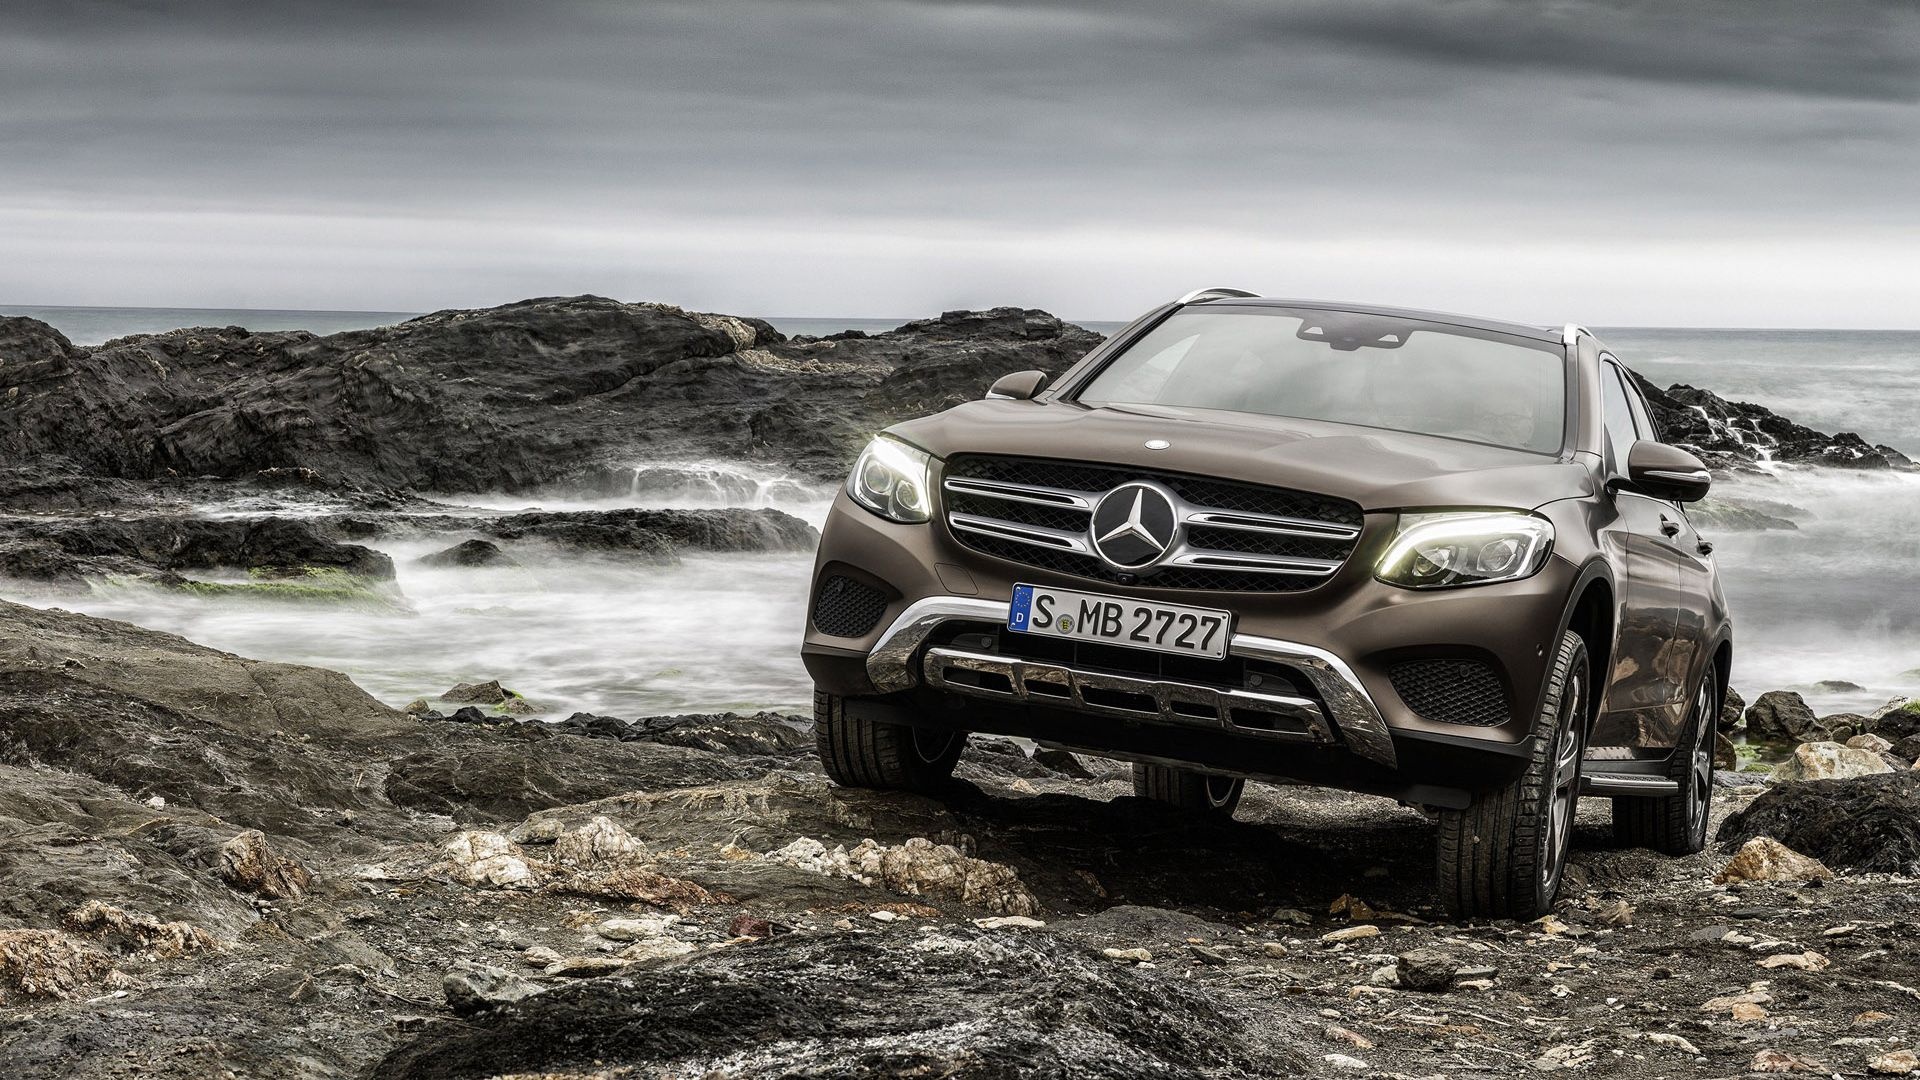 Mercedes-Benz GLC, AMG power, Striking and aggressive, Unmatched performance, 1920x1080 Full HD Desktop